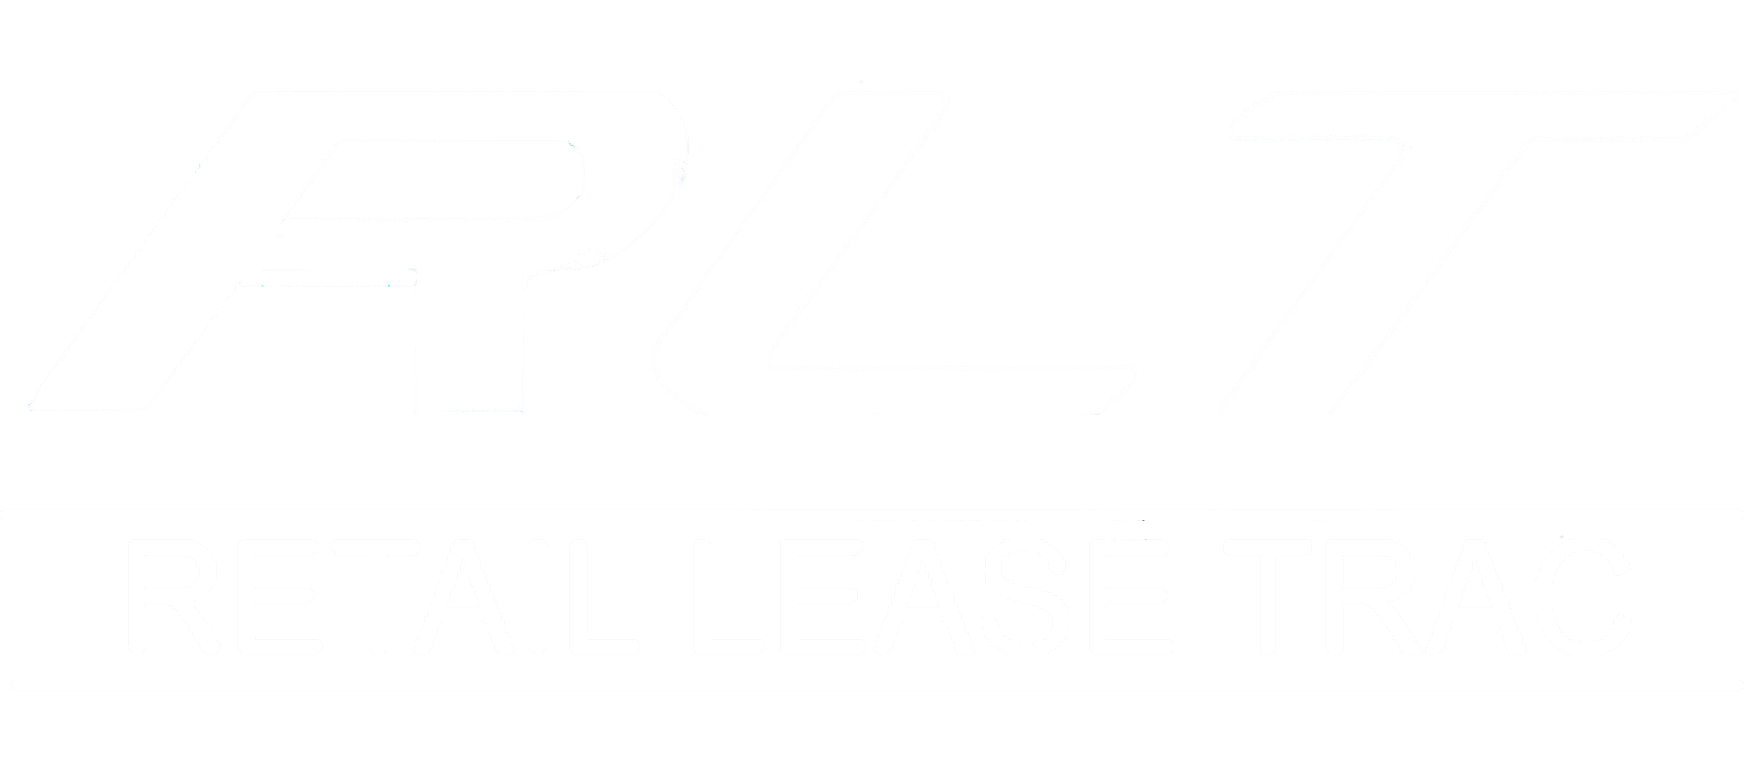 Find Expanding Retailers Looking For Your Property With Retail Lease Trac S Retail Tenant Database